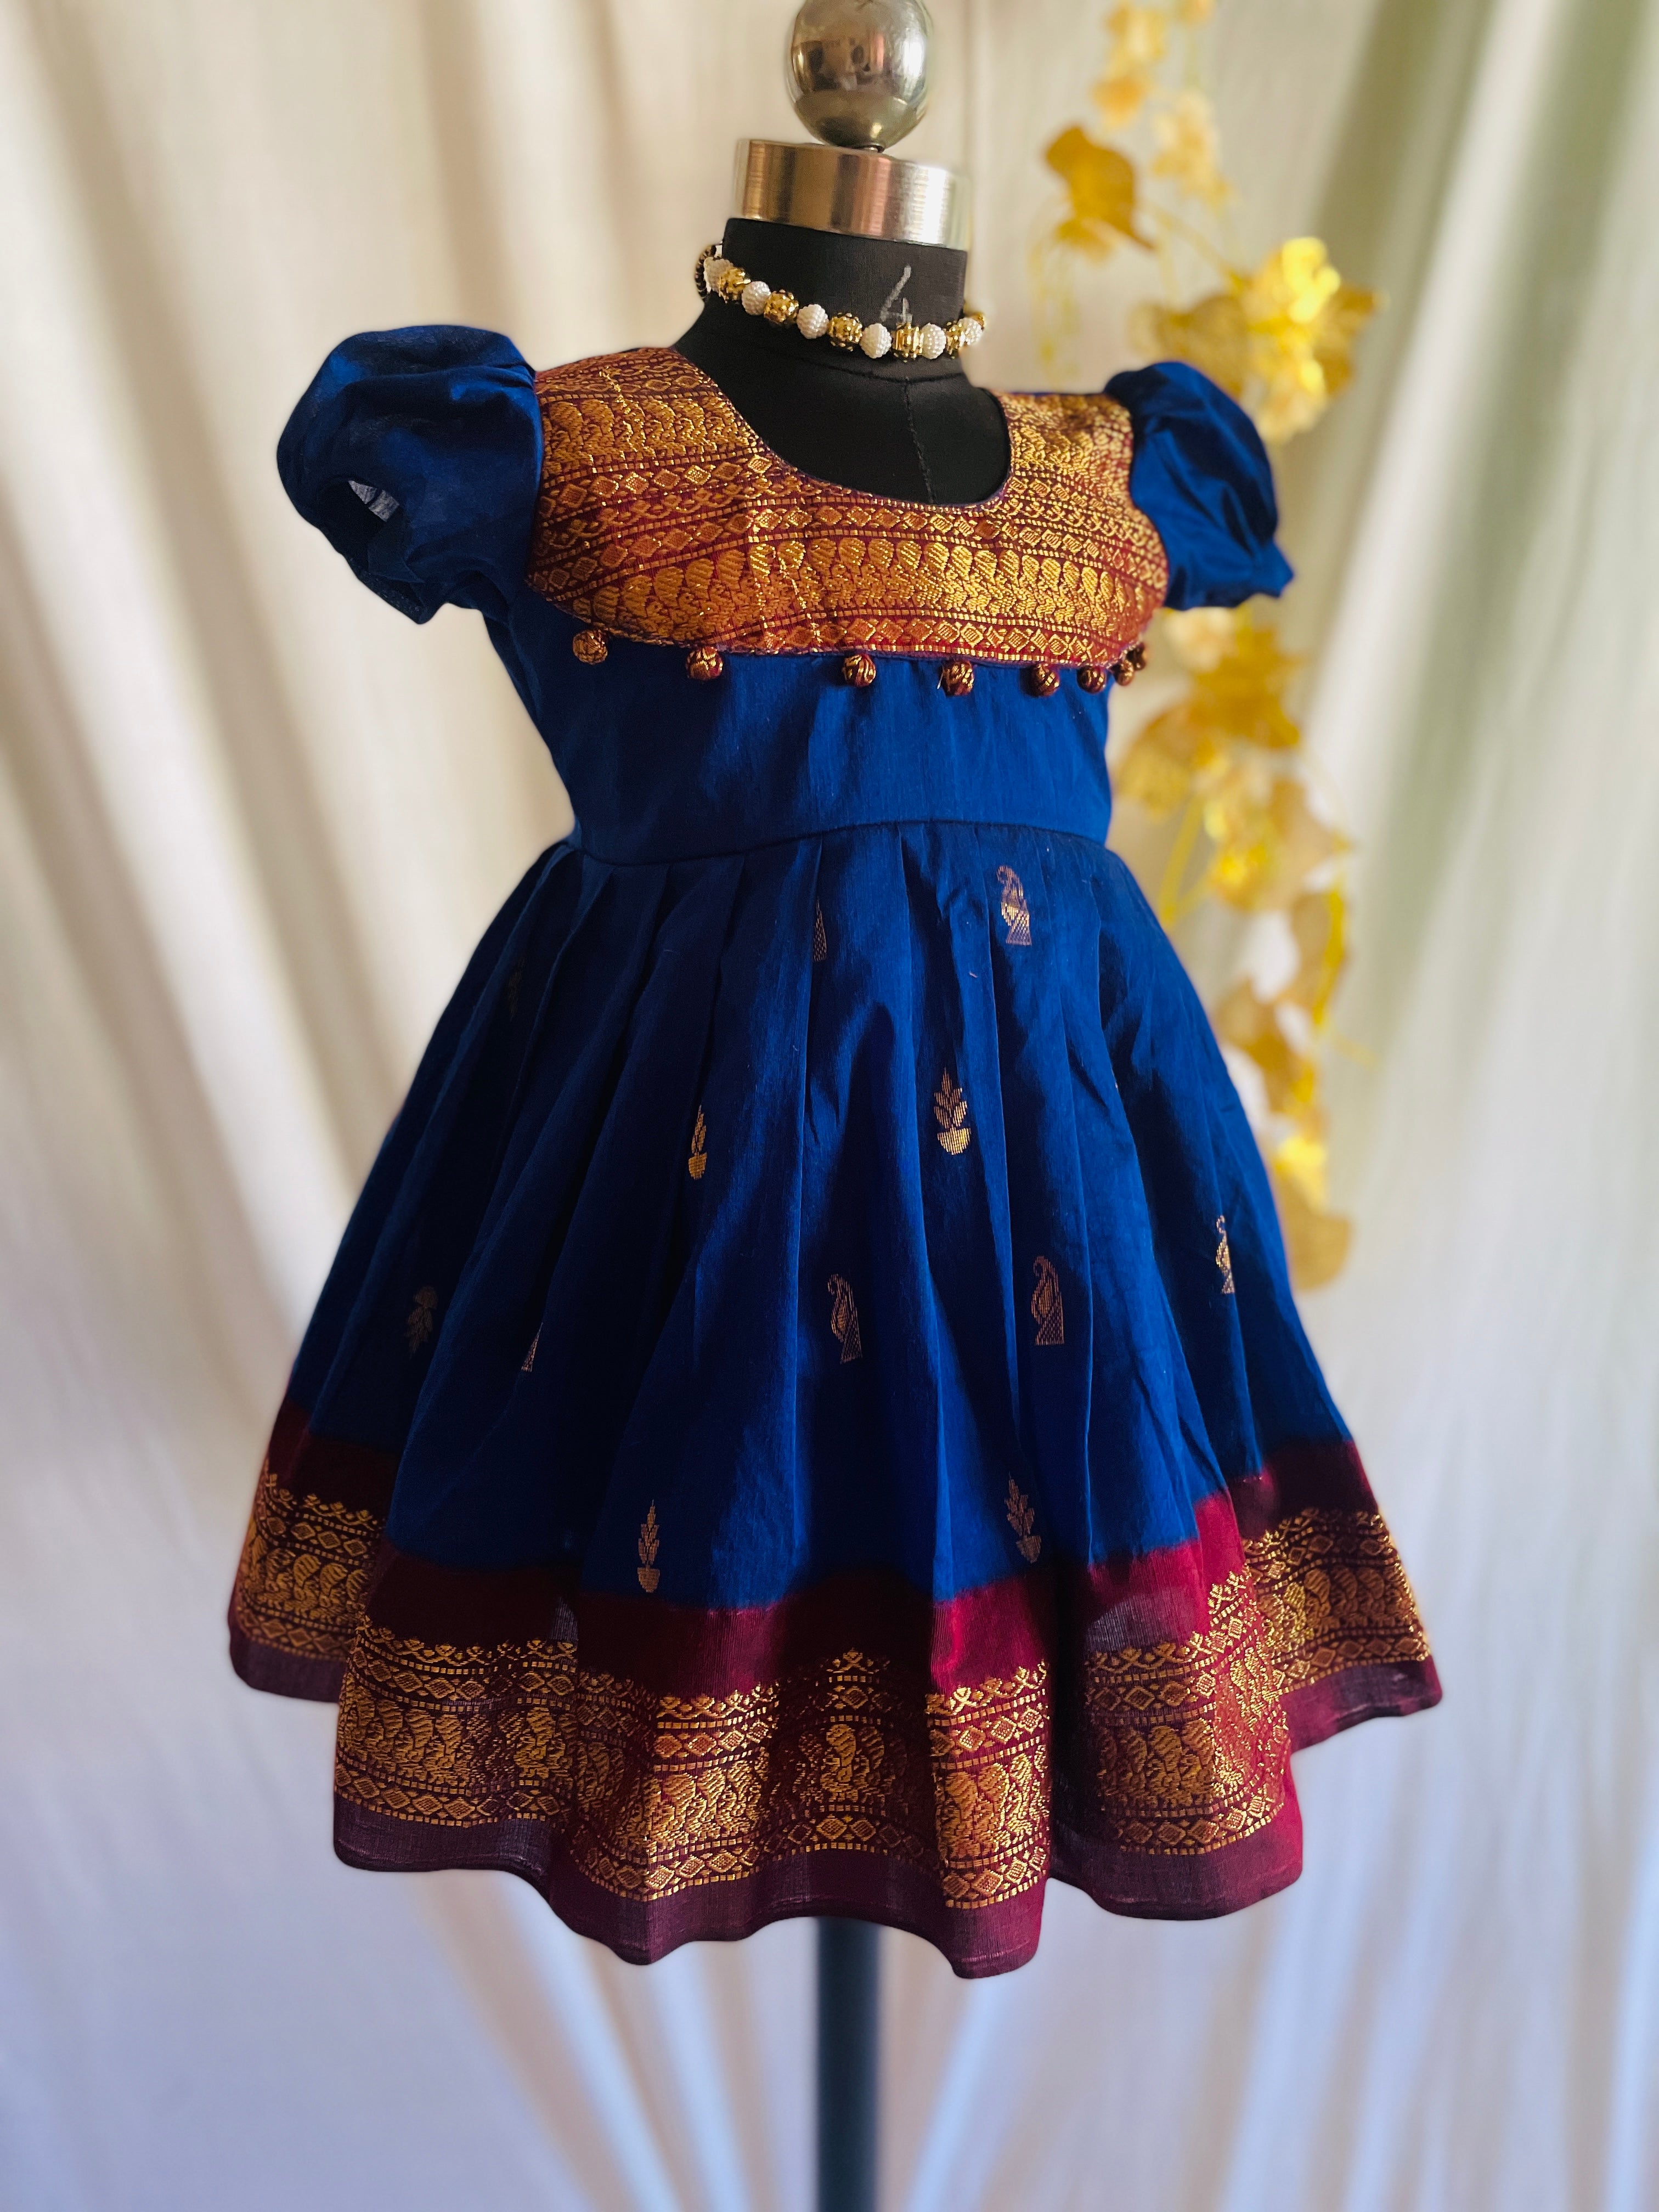 Baby Traditional dress Archives - Moms Love